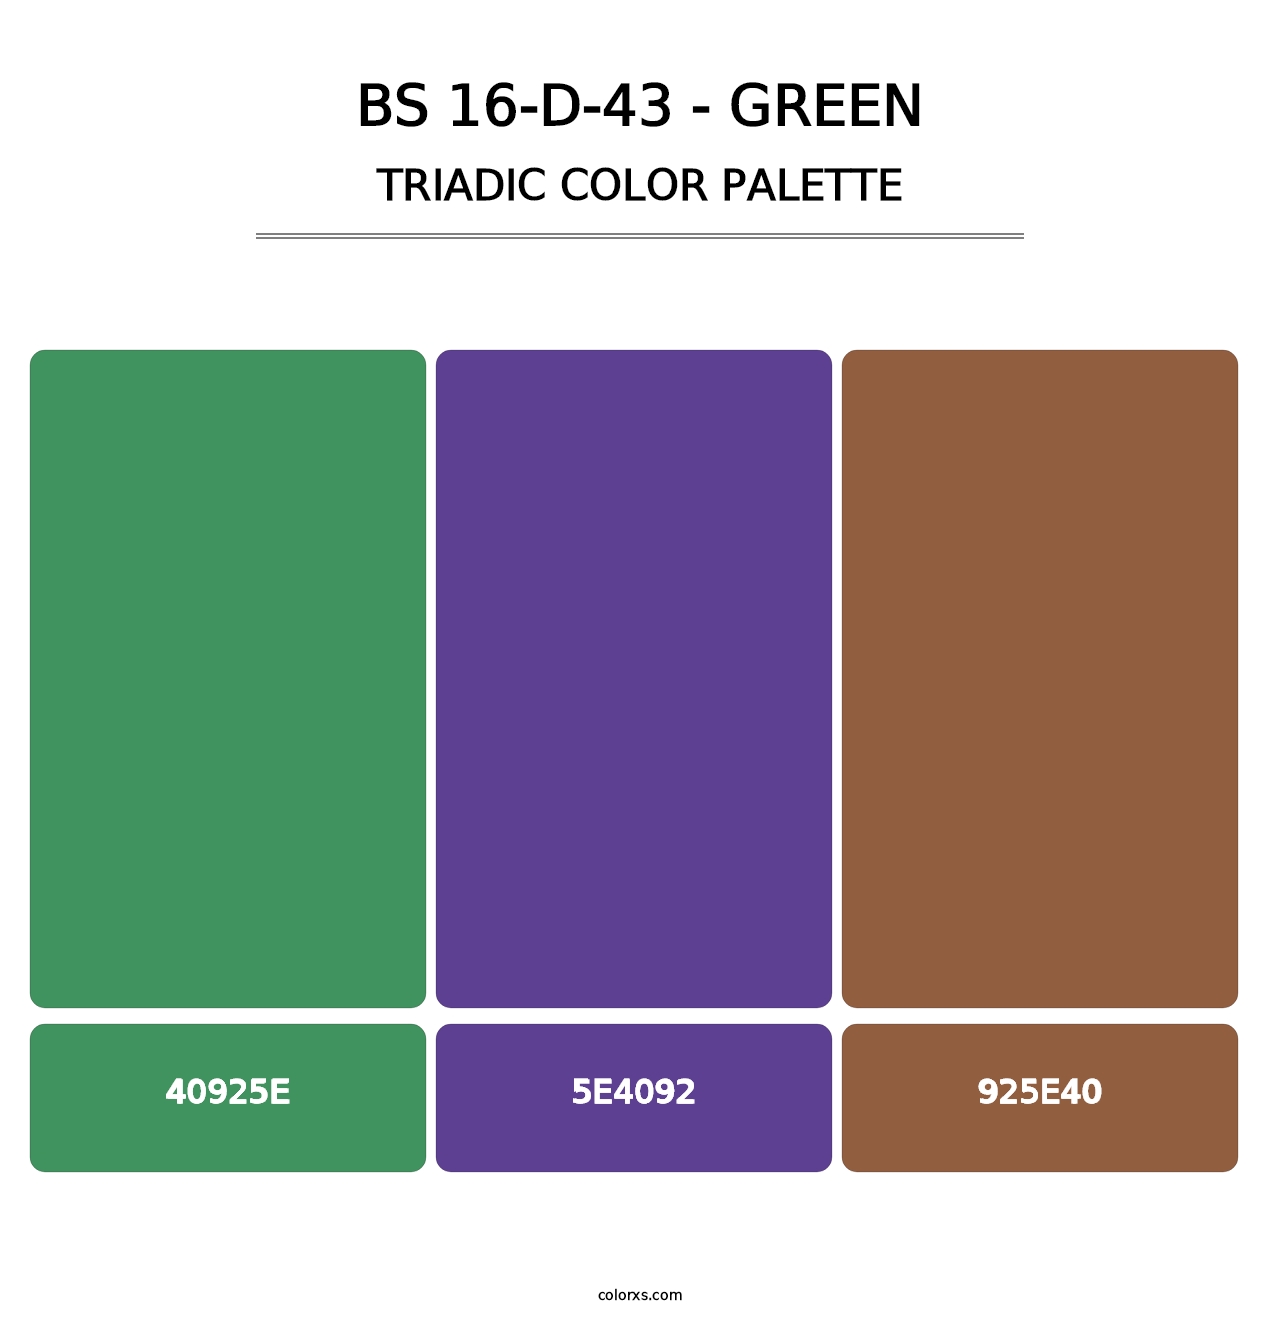 BS 16-D-43 - Green - Triadic Color Palette